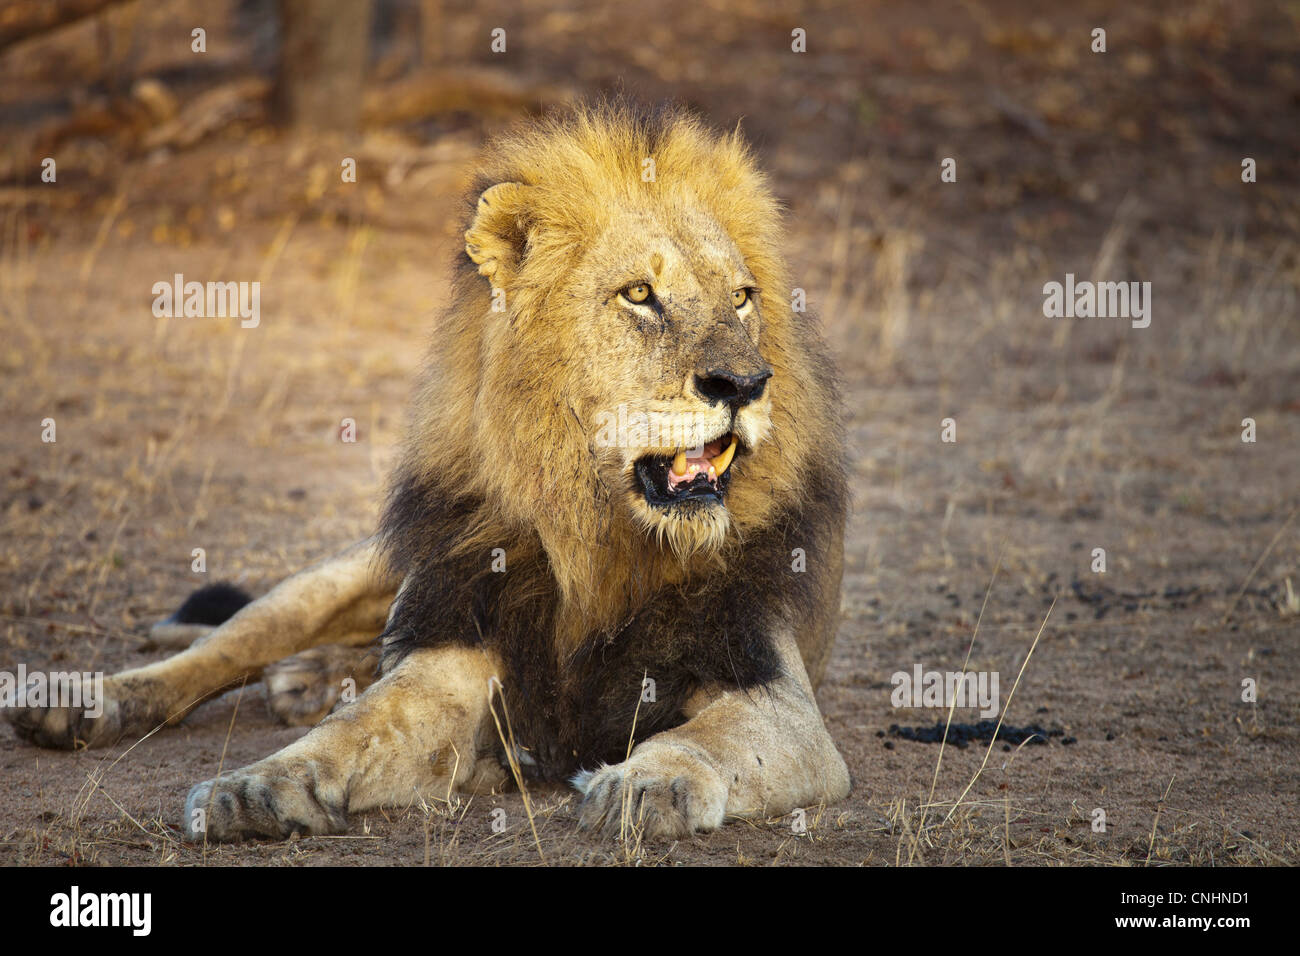 A male lion lying down, sunlight shining on face Stock Photo